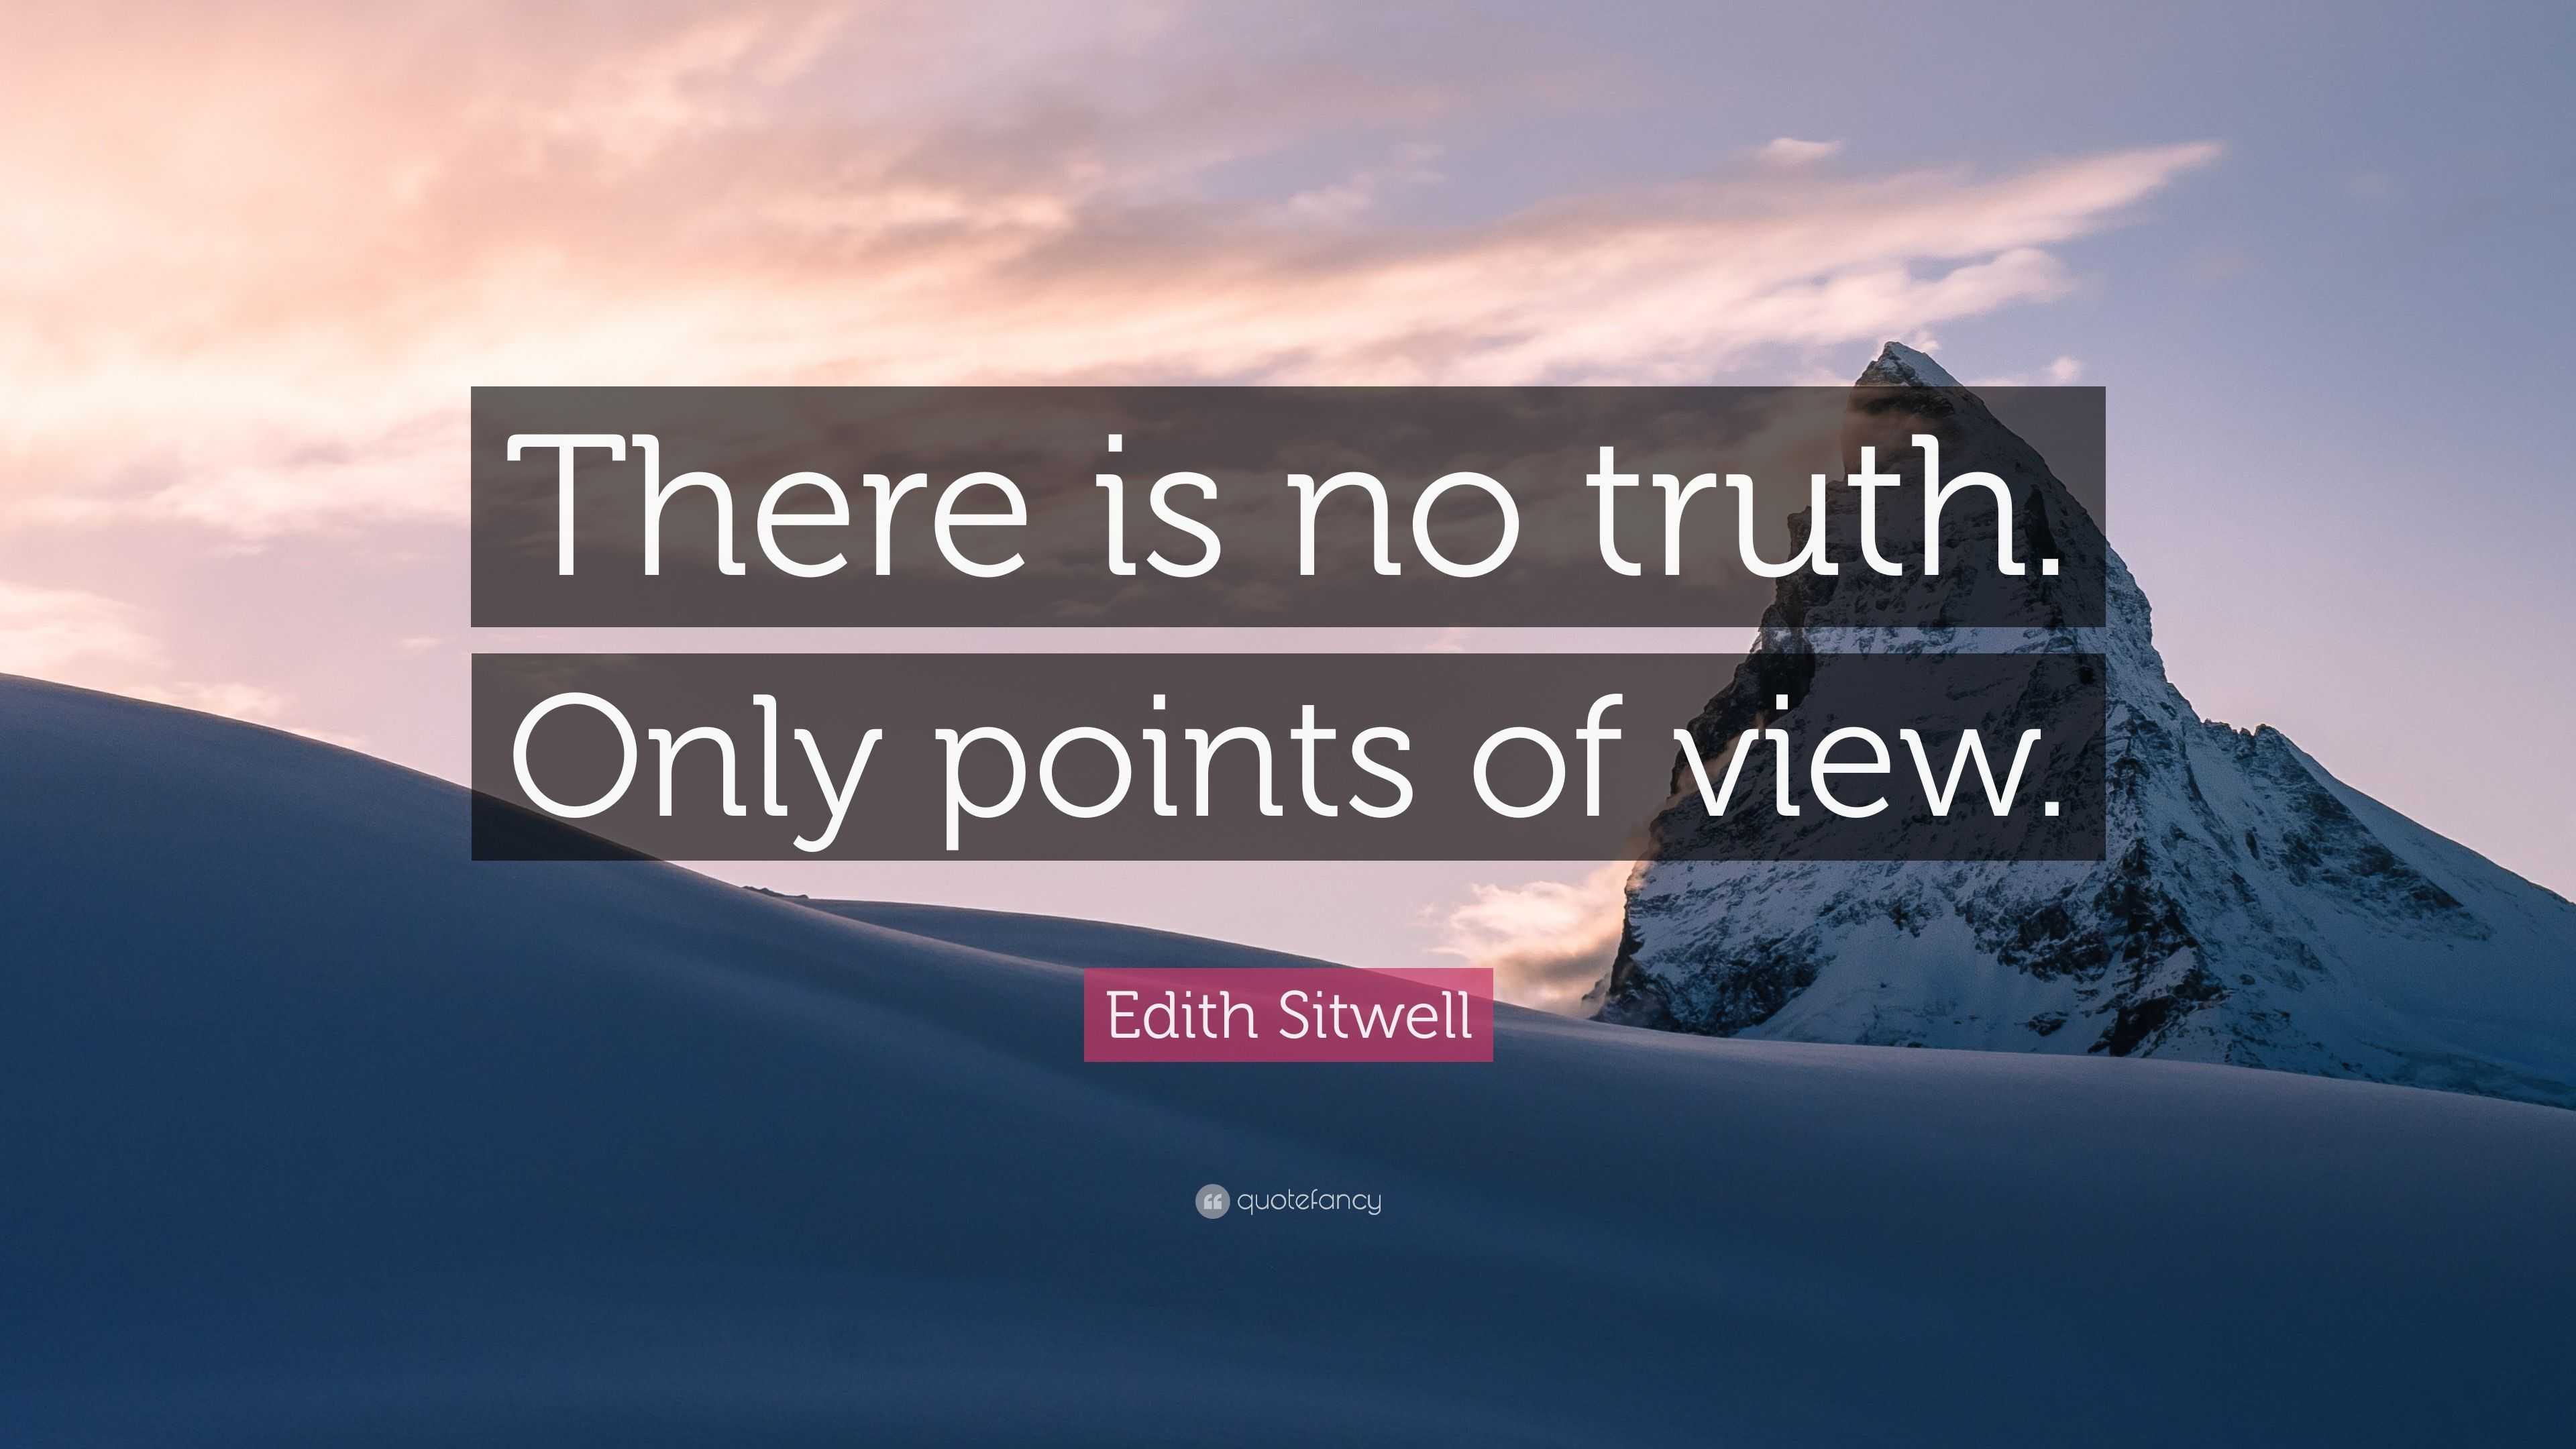 Edith Sitwell Quote: “There is no truth. Only points of view.”